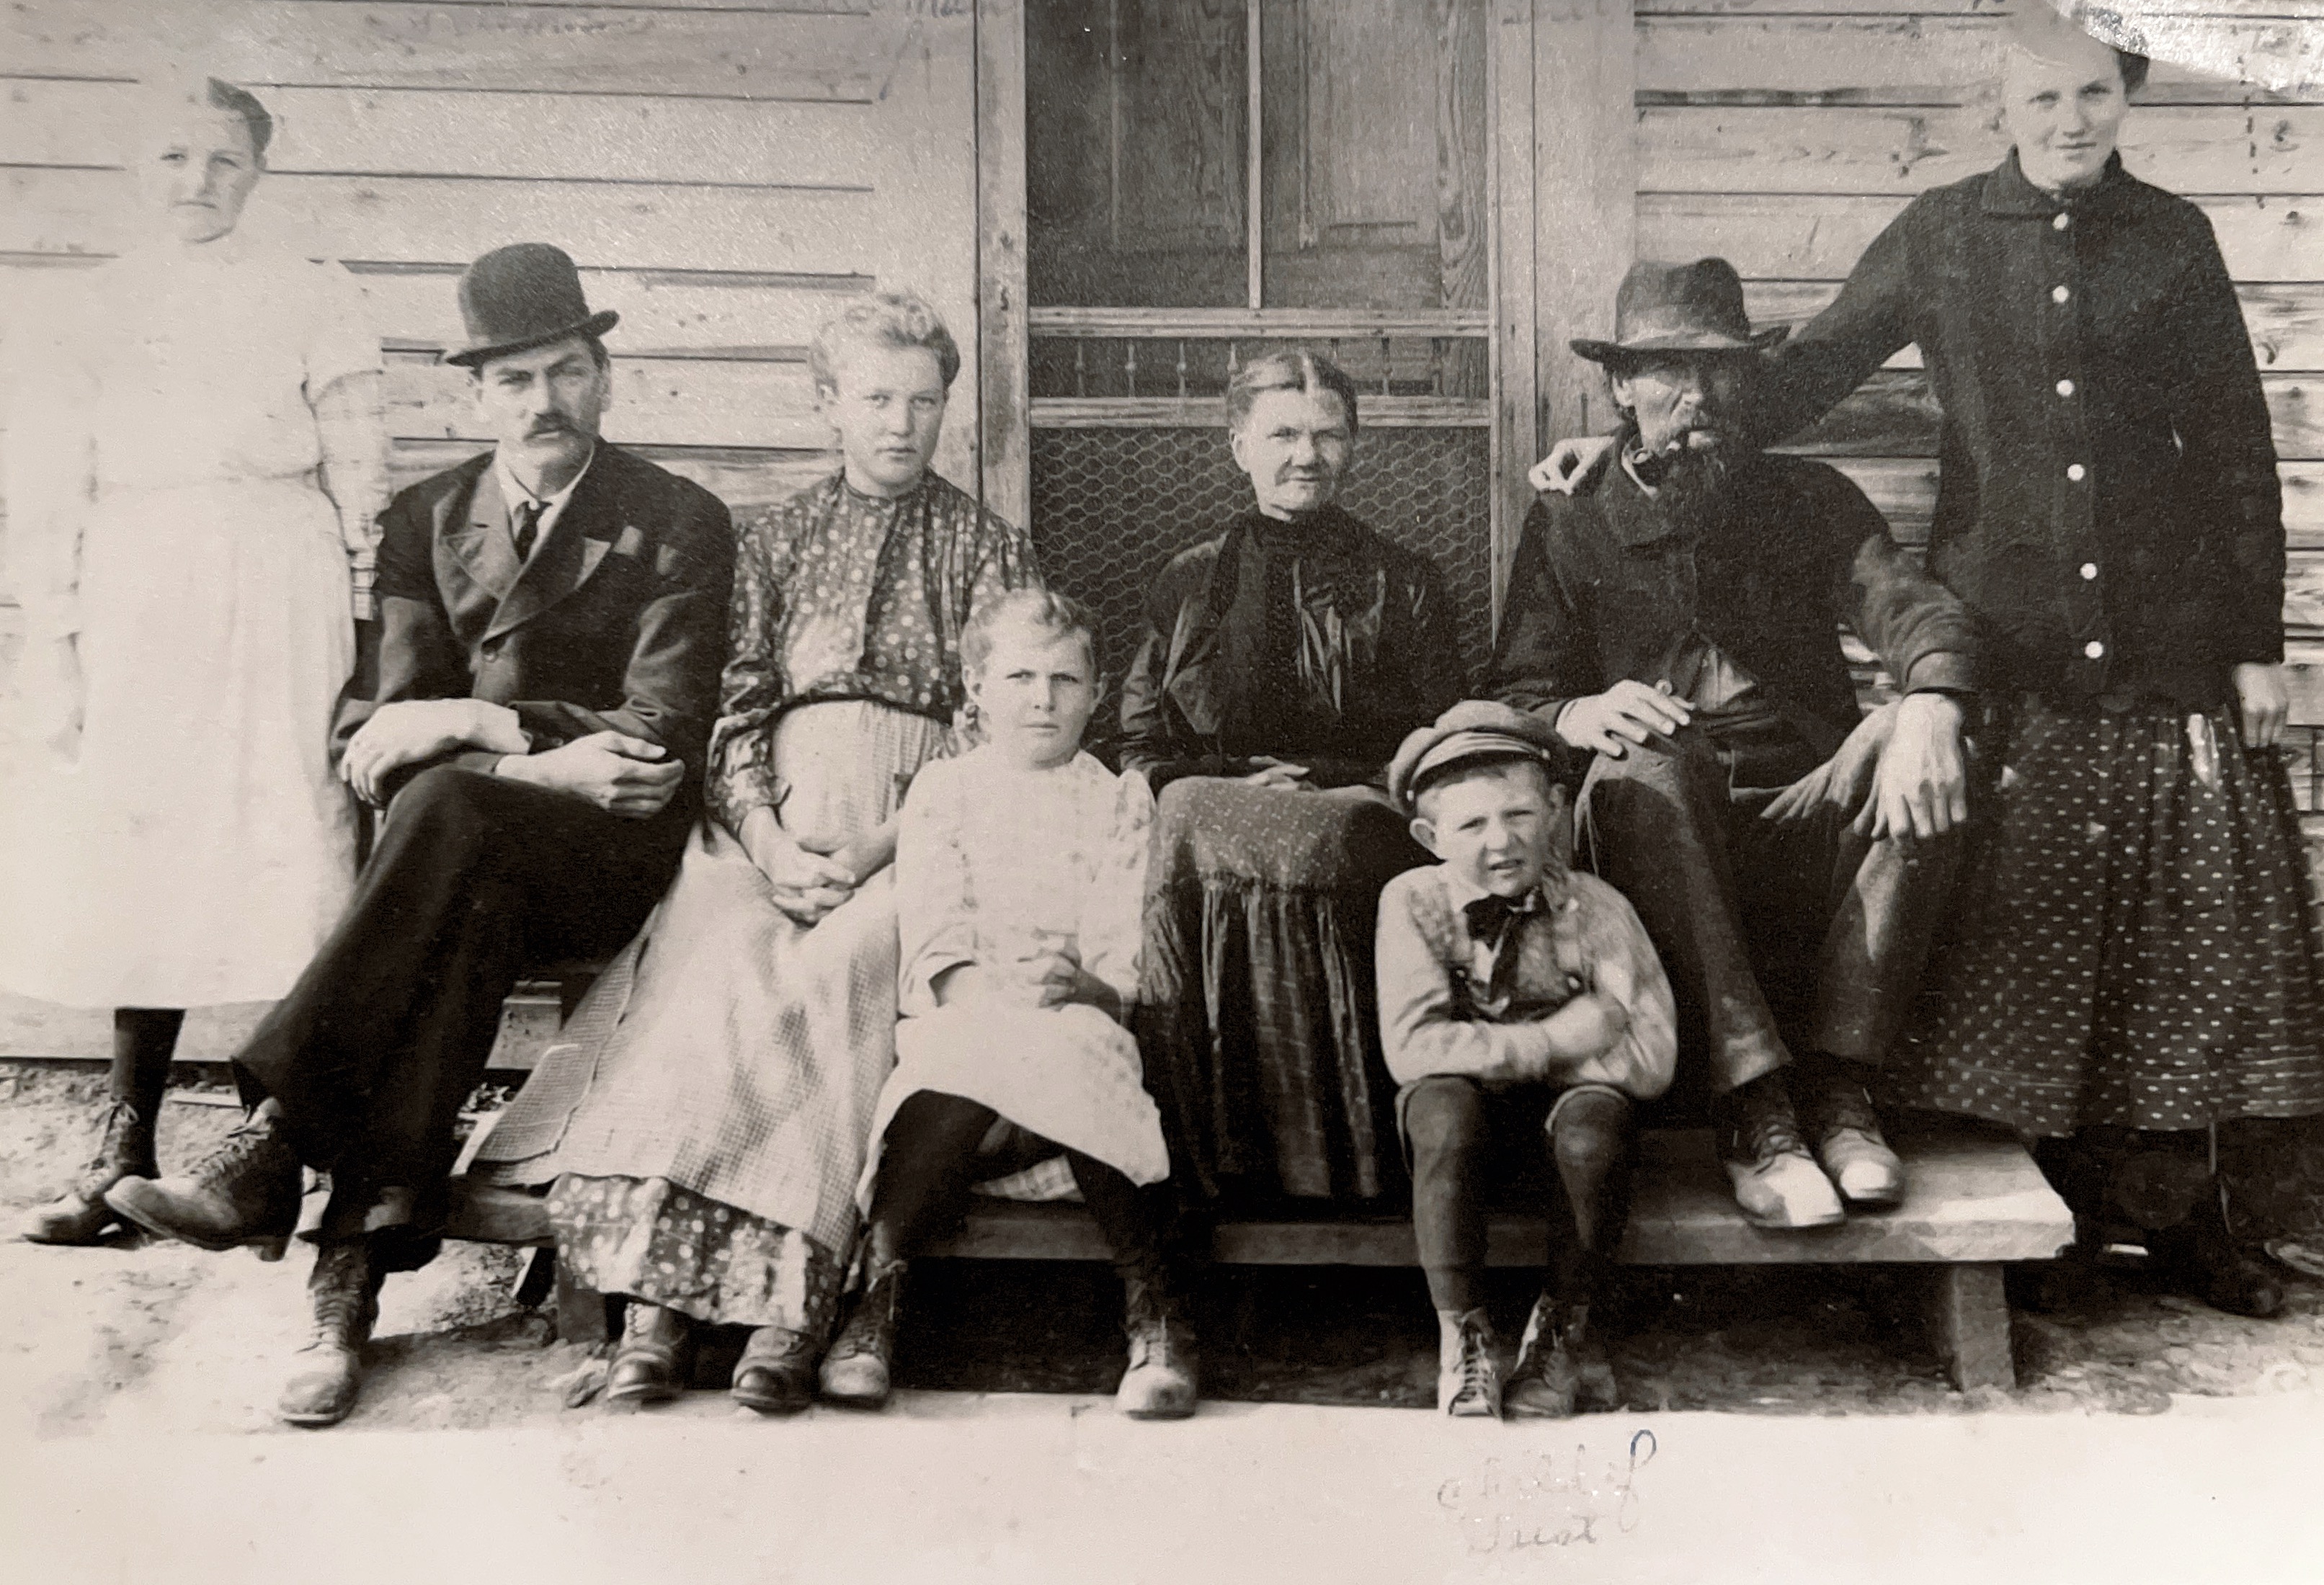 Left to right: 1) Freida Erdmann (August’s daughter) 2) Gustave Sillman (Son of Emilie & Frederick, both in photo) 3) Freida Marie Erdmann (Charles’ daughter) 4) Marie Louise Erdmann (August’s daughter) 5) Emilie Fredericka Löffel Zillmann 6) August Frederick Erdmann (August’s son) 7) Frederick Berg Zillmann 8) Anna Marie Erdmann (Charles’ daughter) (will eventually marry Herman Sillman…..Gustave’s brother) #’s 1,4,6 are siblings #’s 3&8 are sisters Charles and August (not in photo) are brothers, therefore, #’s 1,3,4,6,8 are cousins. 